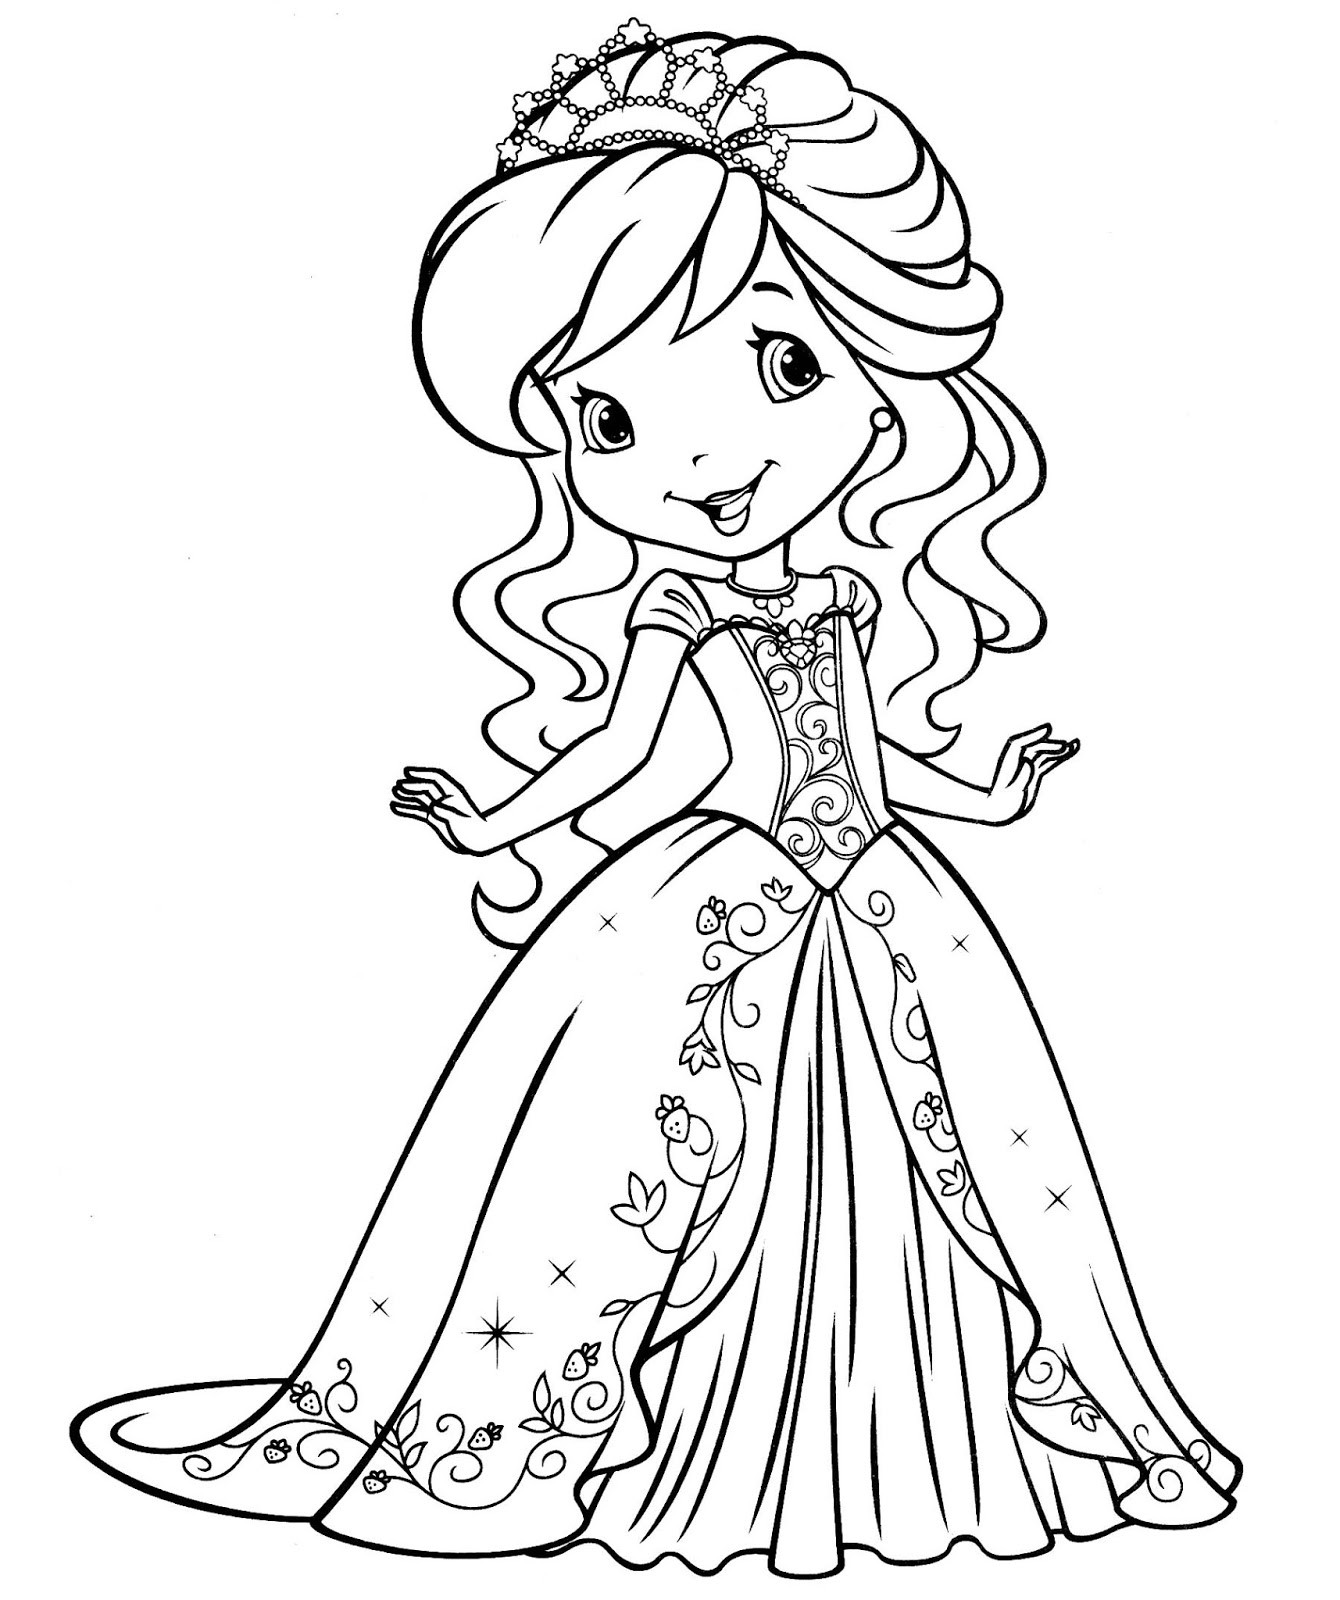 Coloring Pages For Girls People
 Coloring Pages for Girls Best Coloring Pages For Kids